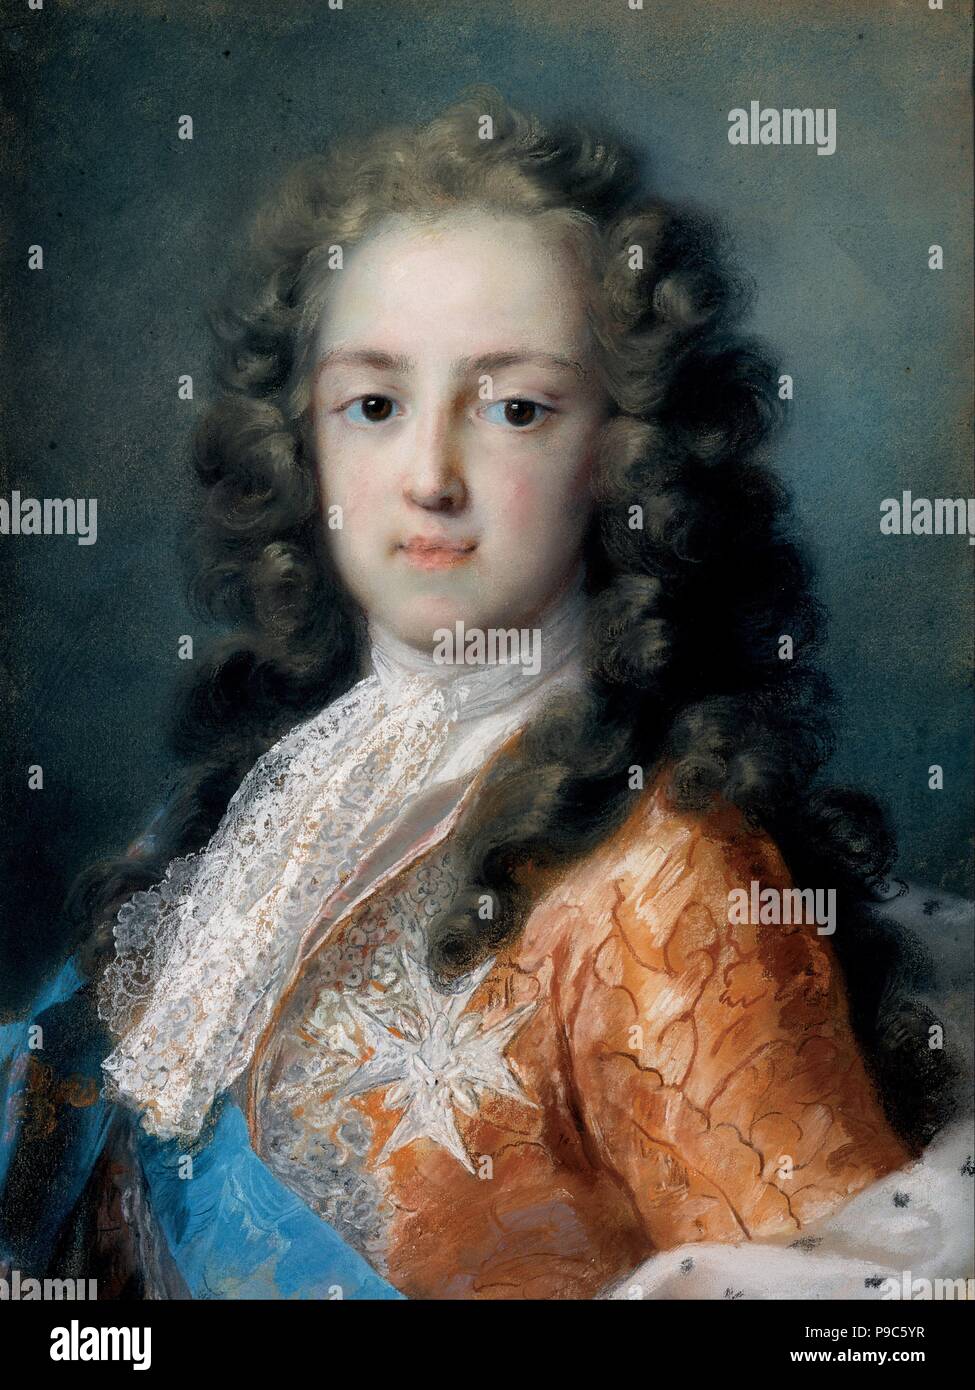 Louis XV of France (1710-1774) as Dauphin. Museum: Dresden State Art Collections. Stock Photo